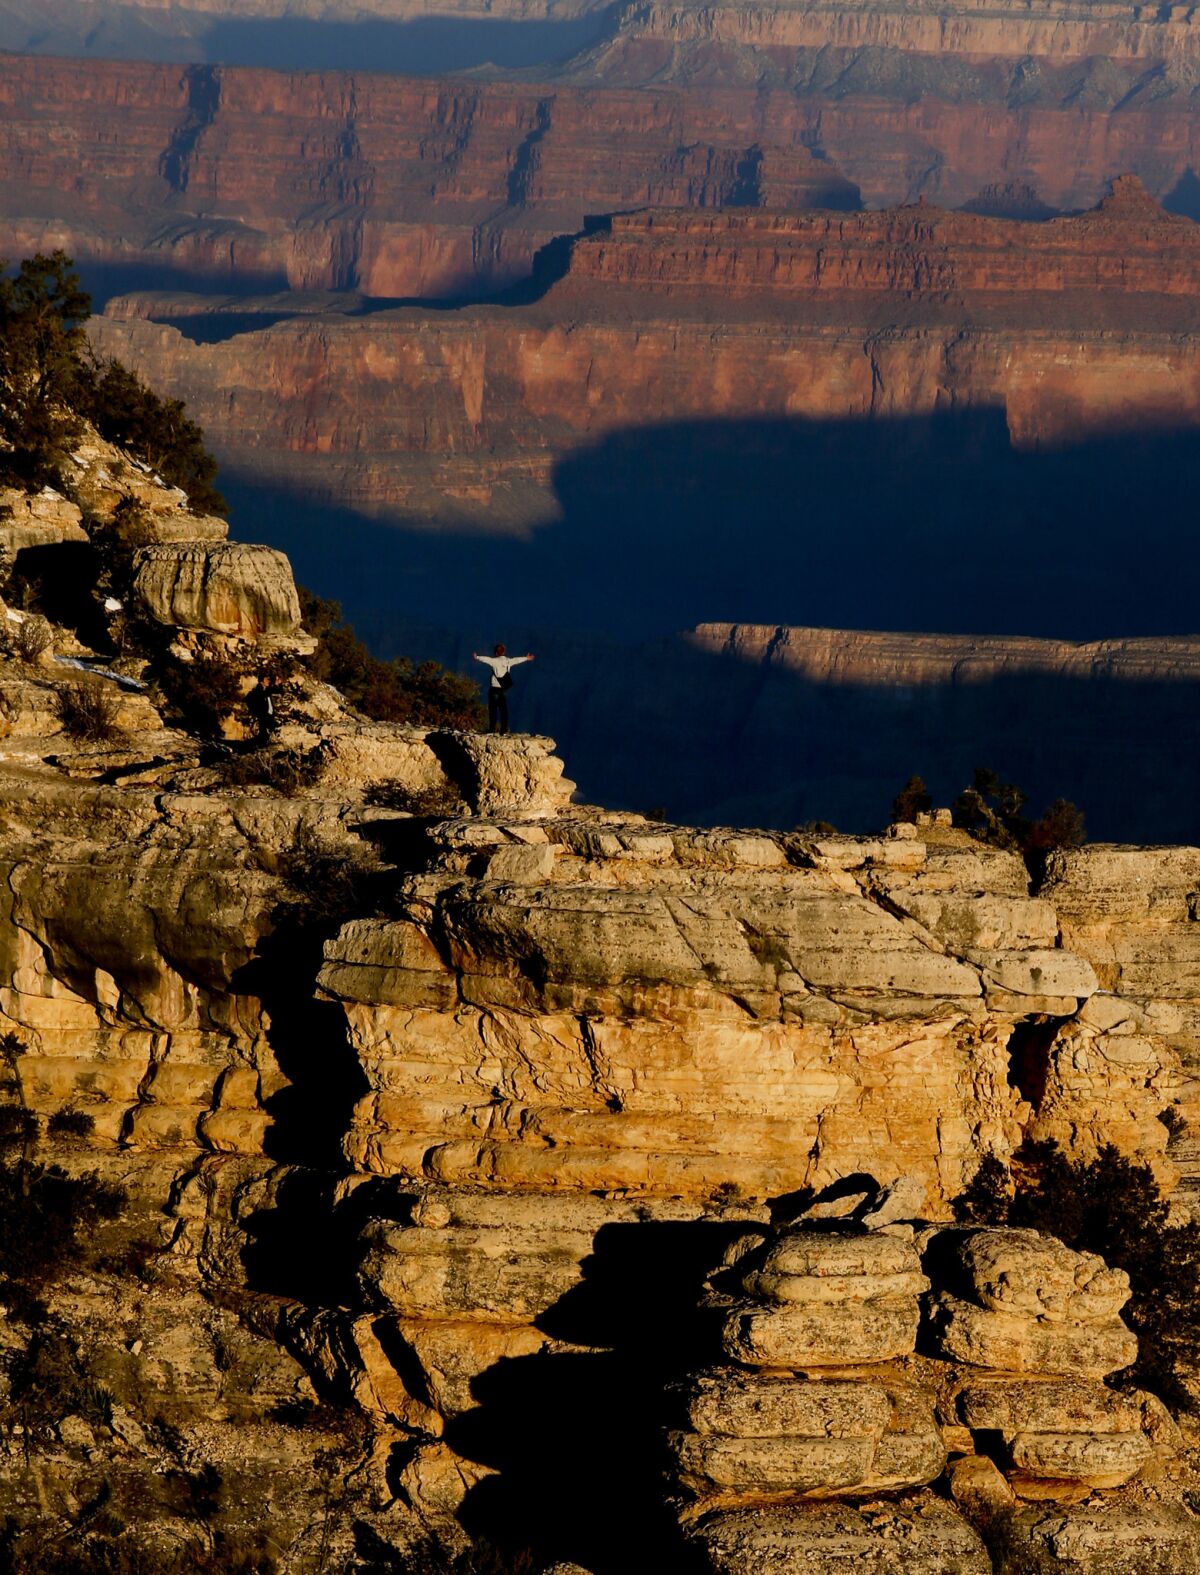 The Grand Canyon's South Rim is ideal for a sit-down. (Mark Boster / Los Angeles Times)